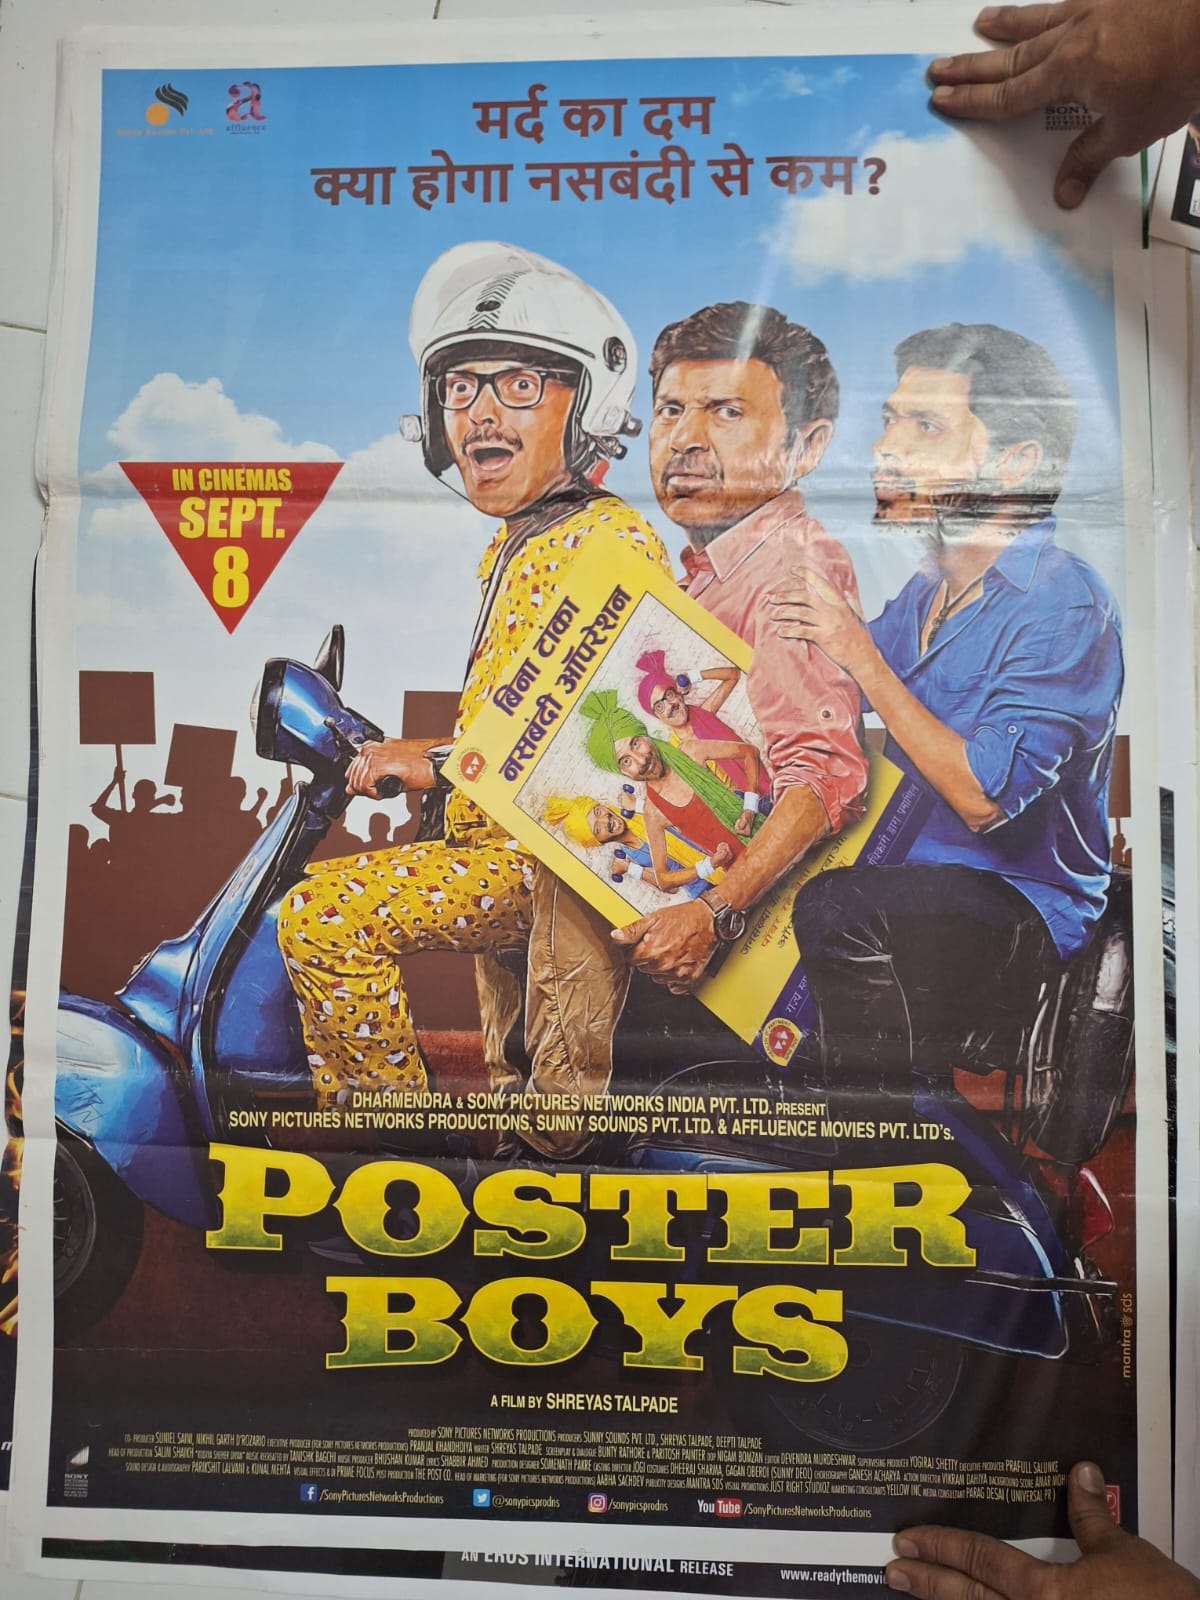 POSTER BOYS BOLLYWOOD MOVIE POSTER